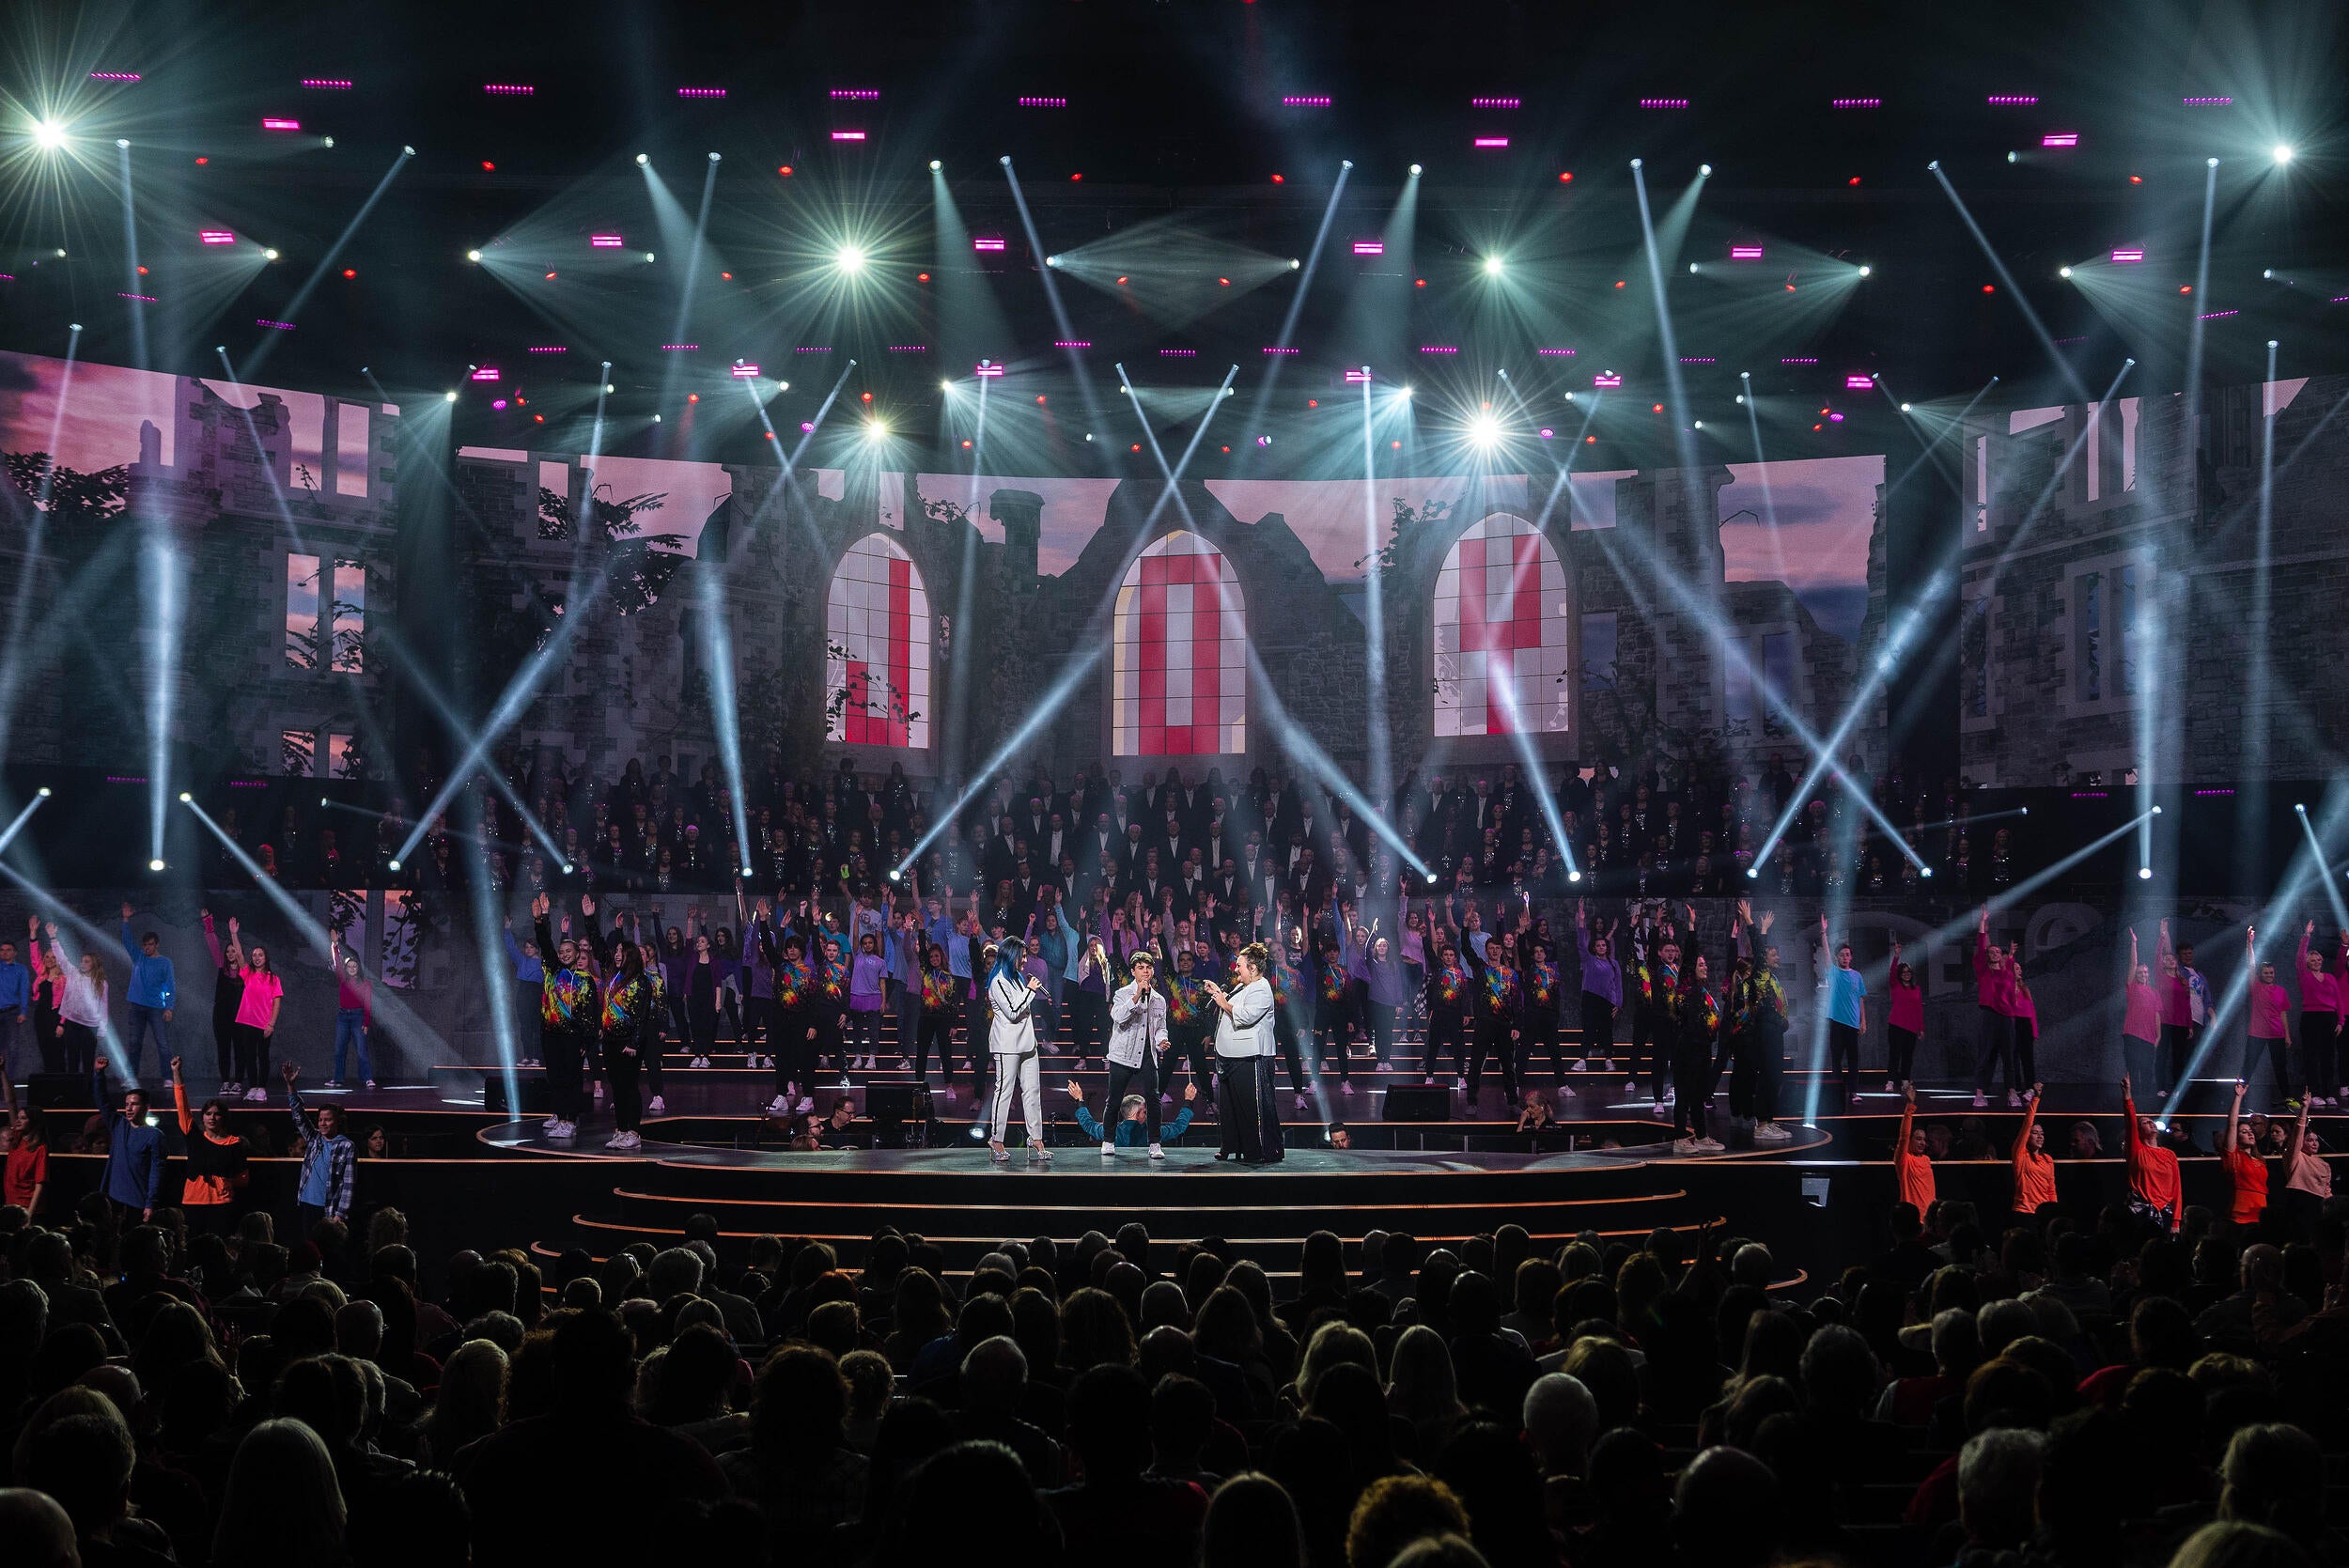 With as many as 1,000 people onstage and 40 channels of wireless microphones, Prestonwood Baptist Church celebrates the year’s major holidays with massive productions with many moving parts all taking place in a highly challenging RF environment.